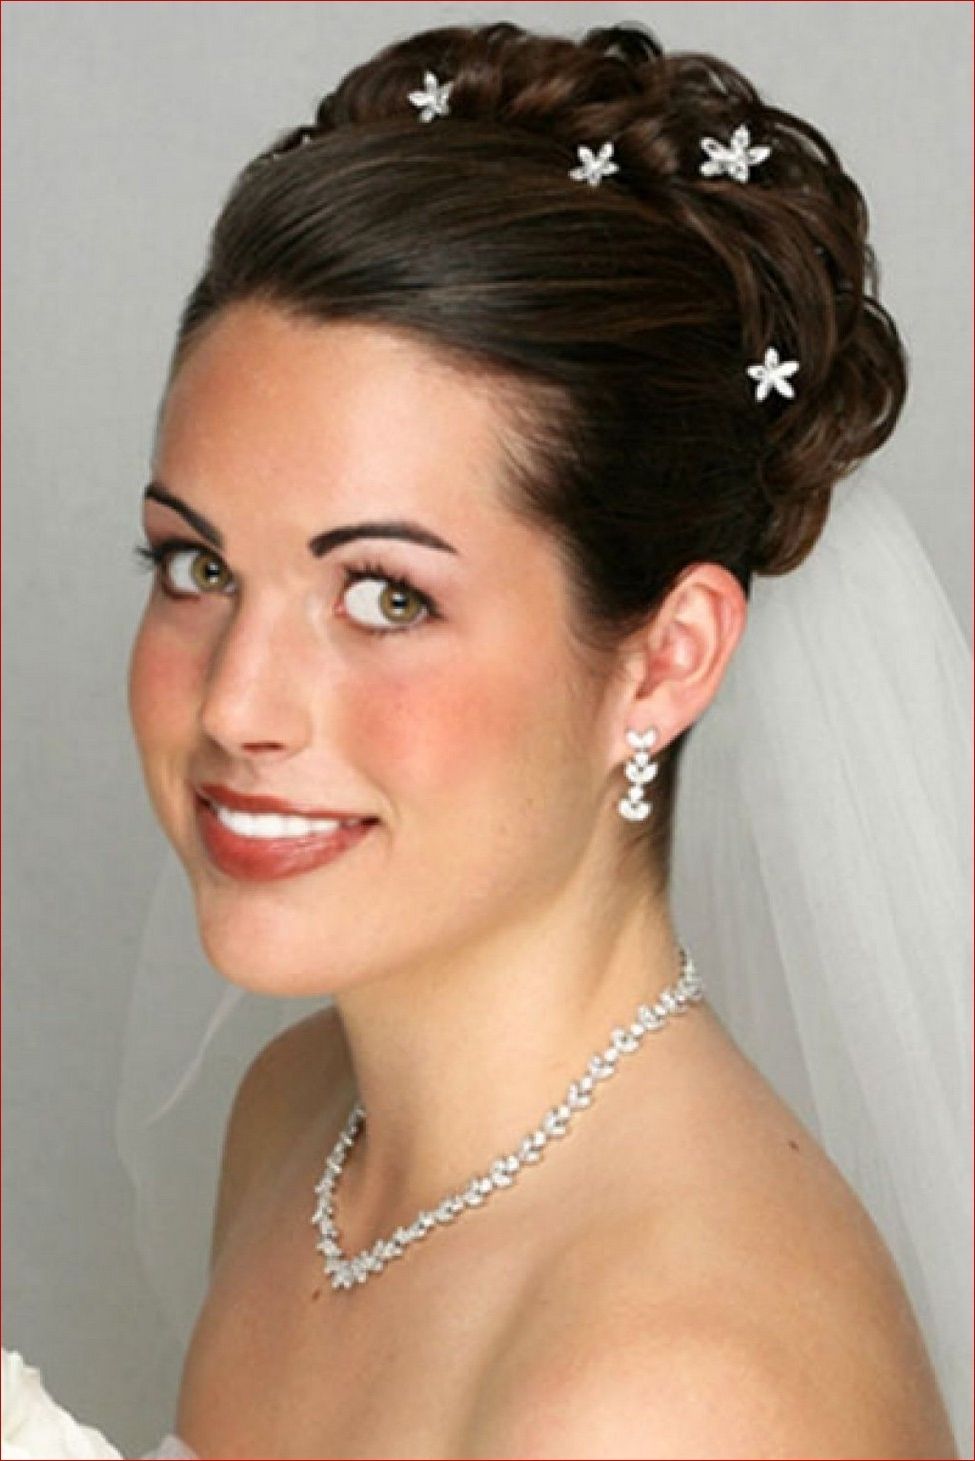 Best Wedding Hair Shoulder Length For Yournstagram Photos Hairstyles Throughout Most Popular Wedding Hairstyles For Shoulder Length Hair With Fringe (View 10 of 15)